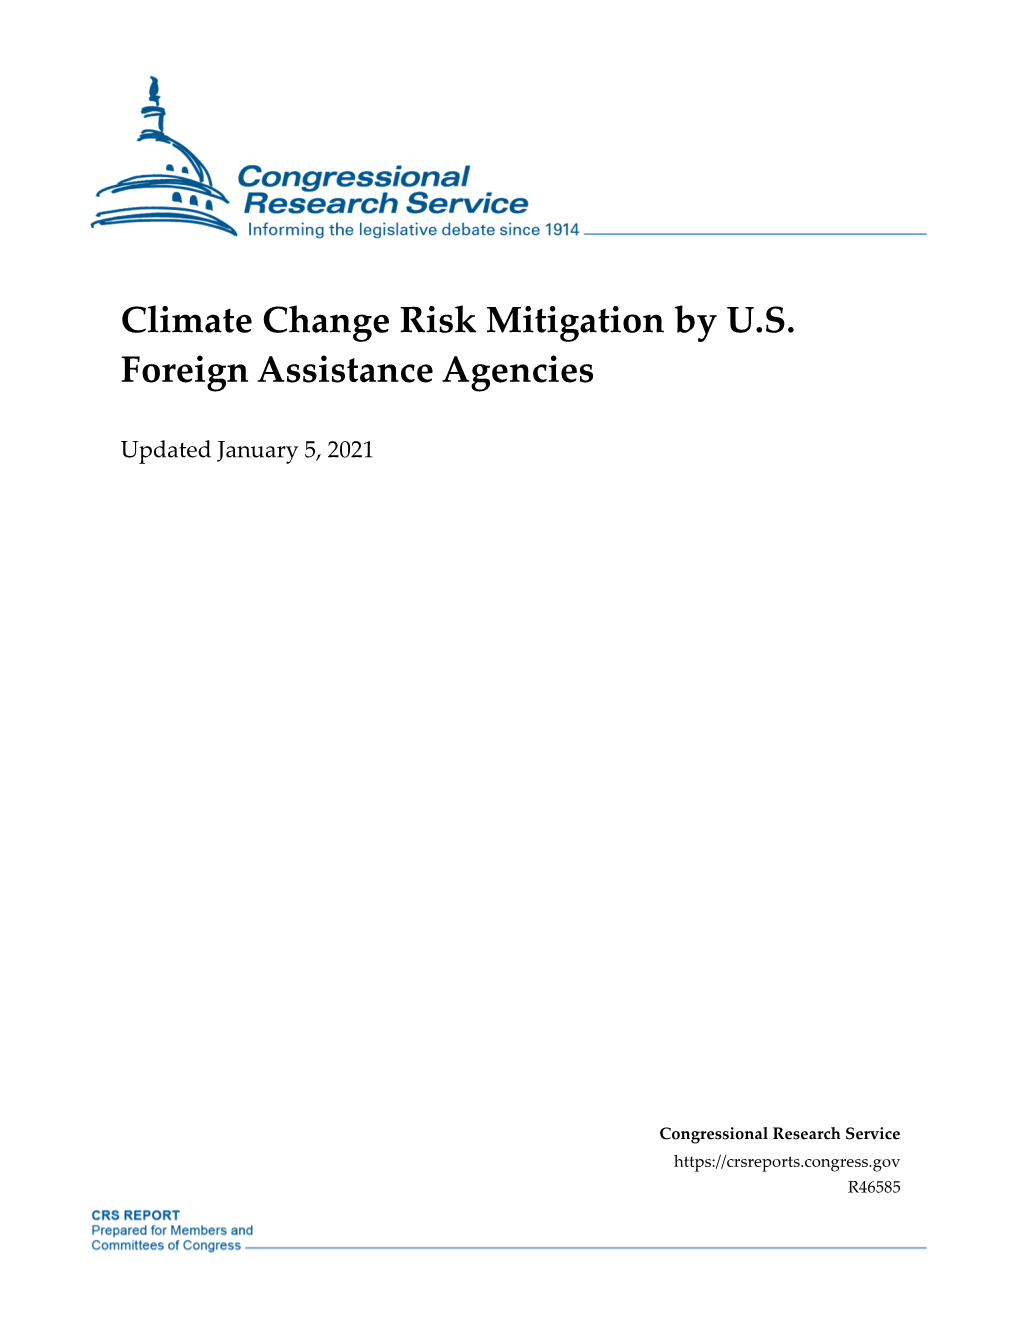 Climate Change Risk Mitigation by U.S. Foreign Assistance Agencies